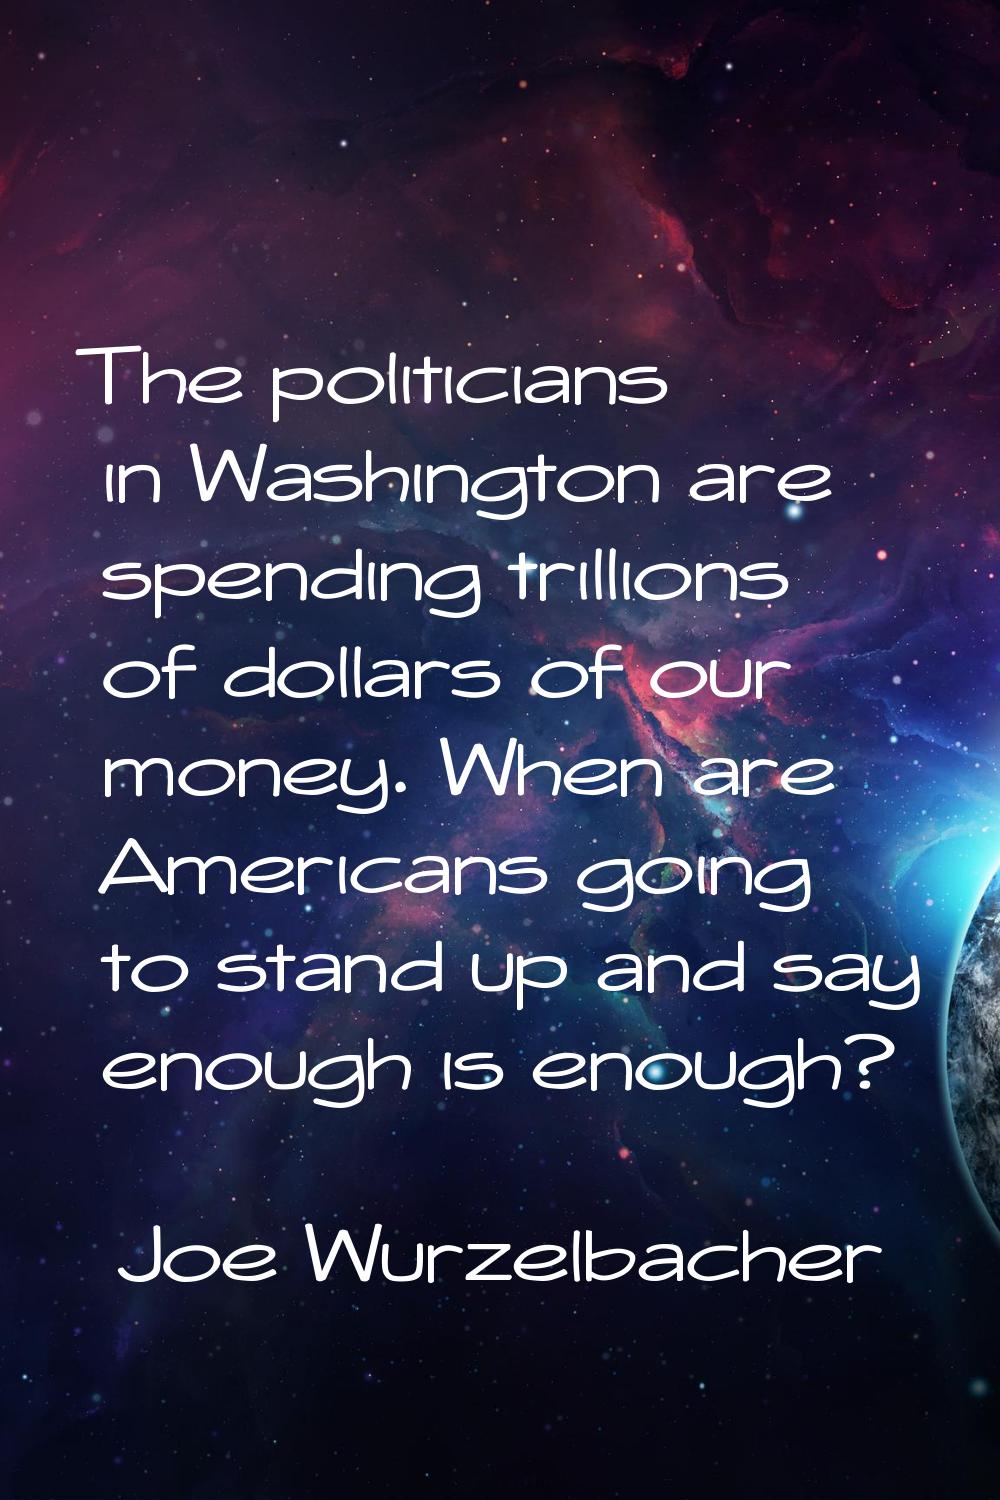 The politicians in Washington are spending trillions of dollars of our money. When are Americans go